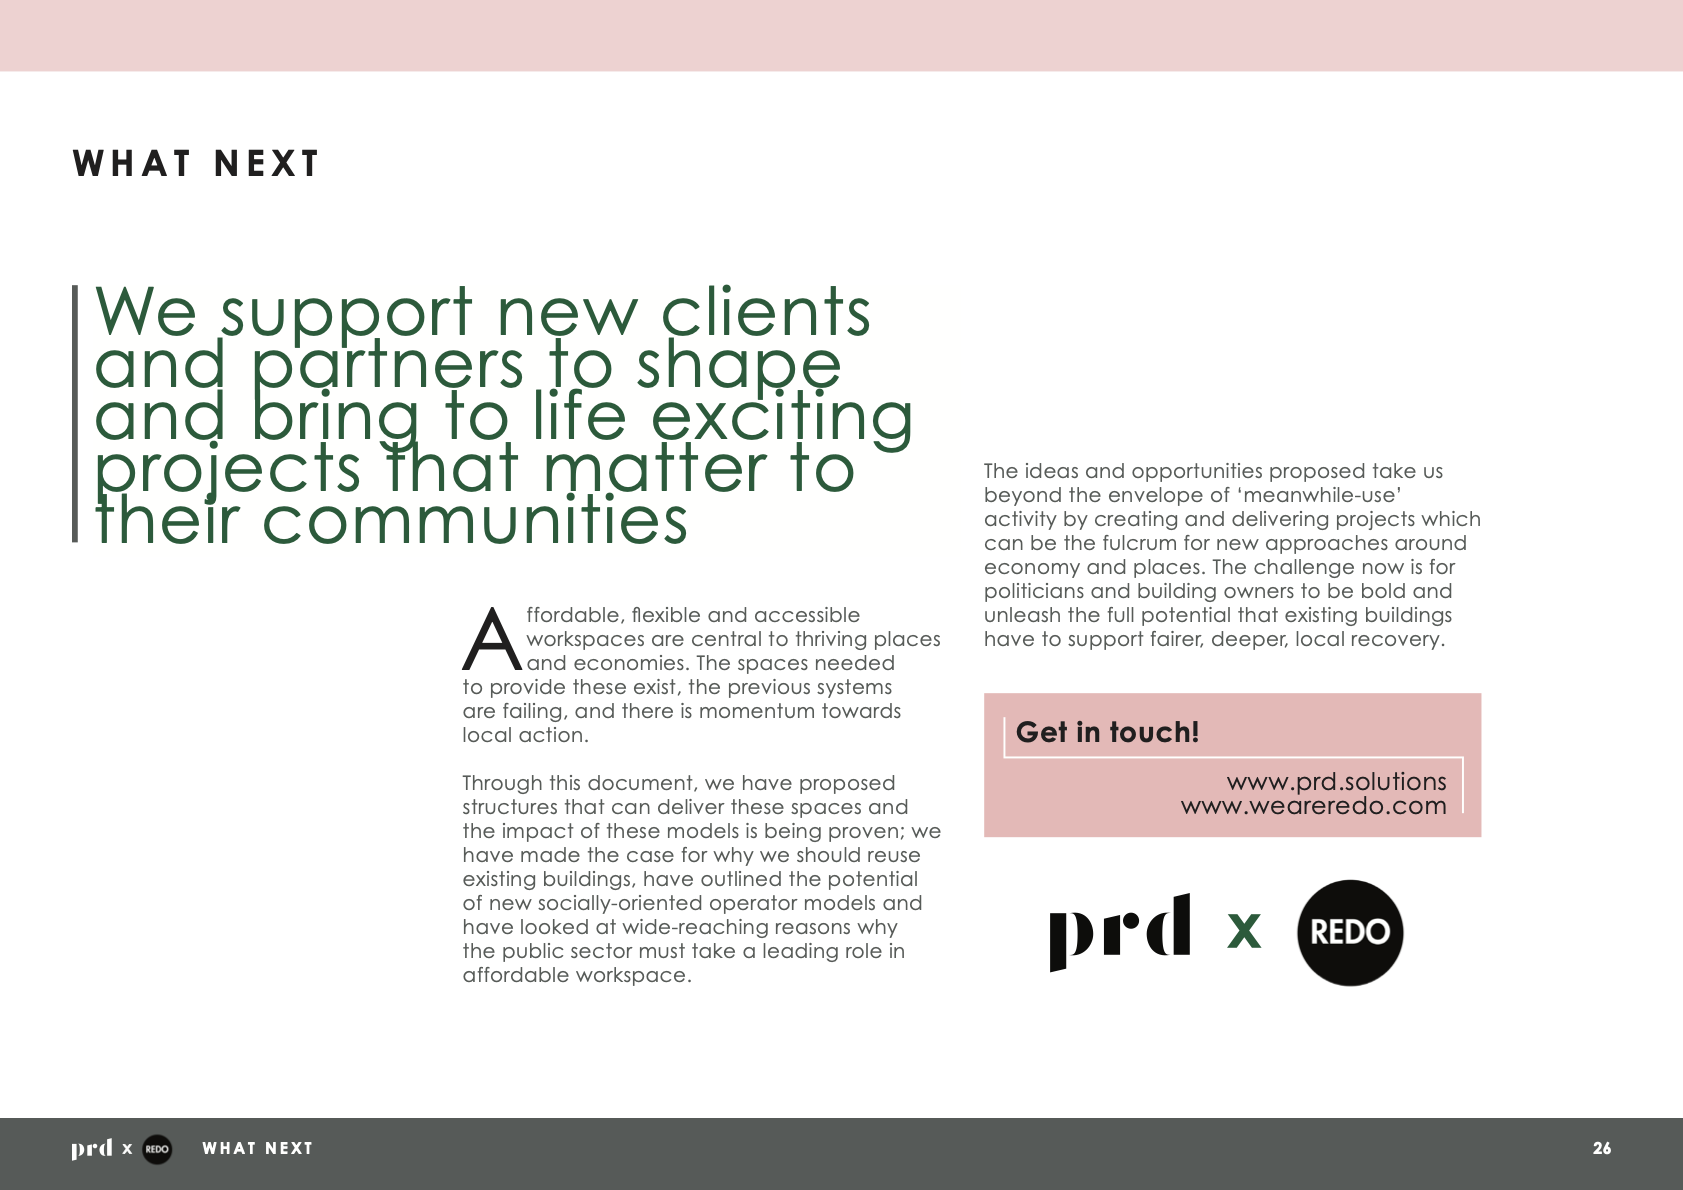 PRD x REDO_A Better Approach to Affordable Workspace_The Opportunity to Act-26 (dragged).png